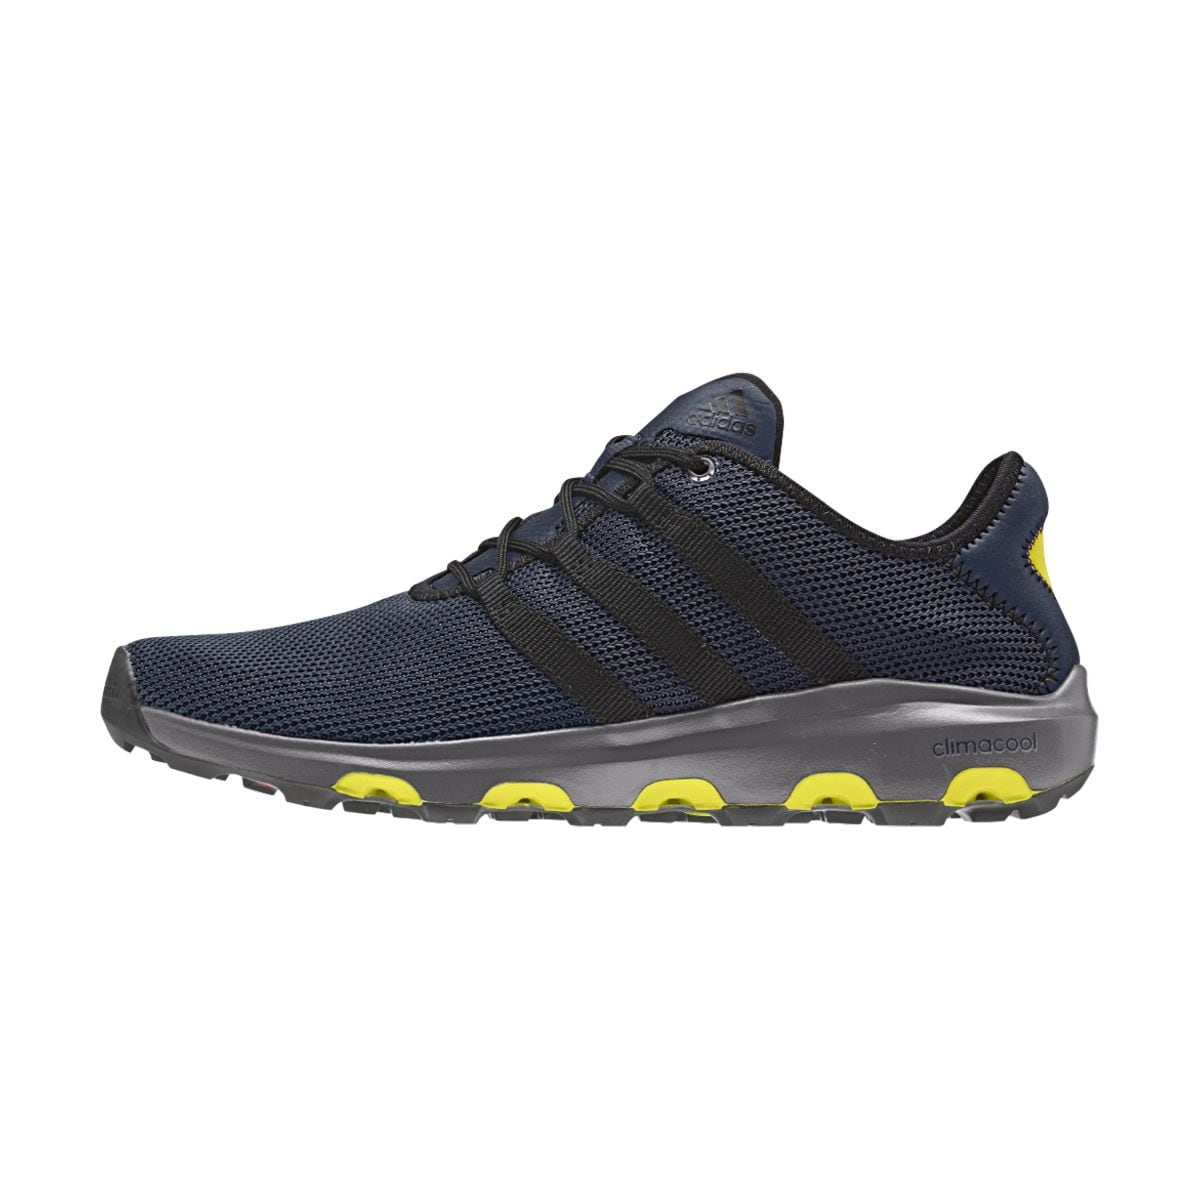 Adidas Outdoor Climacool Voyager Shoe Mens ADA004D COLNAVYL S75